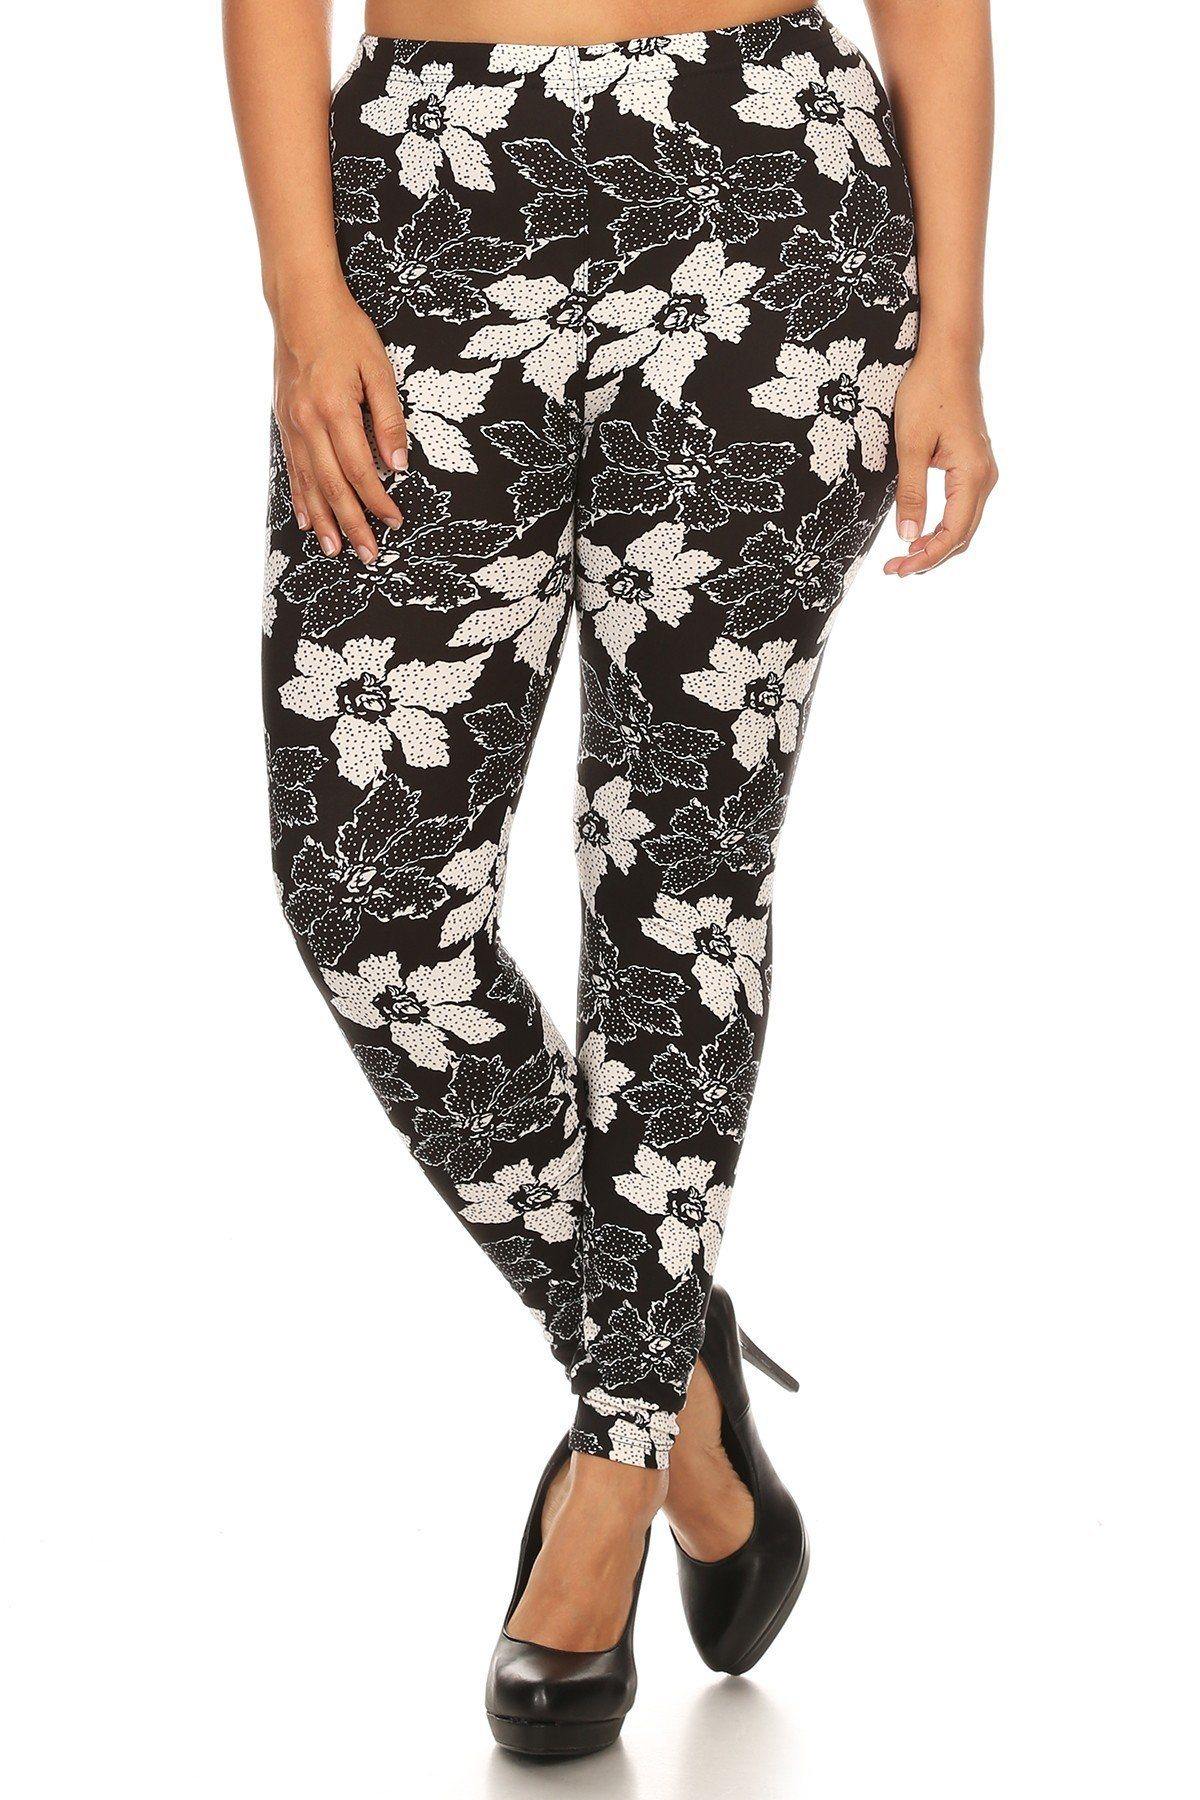 Plus Size Floral Pattern Printed Knit Legging With Elastic Waistband - Pearlara